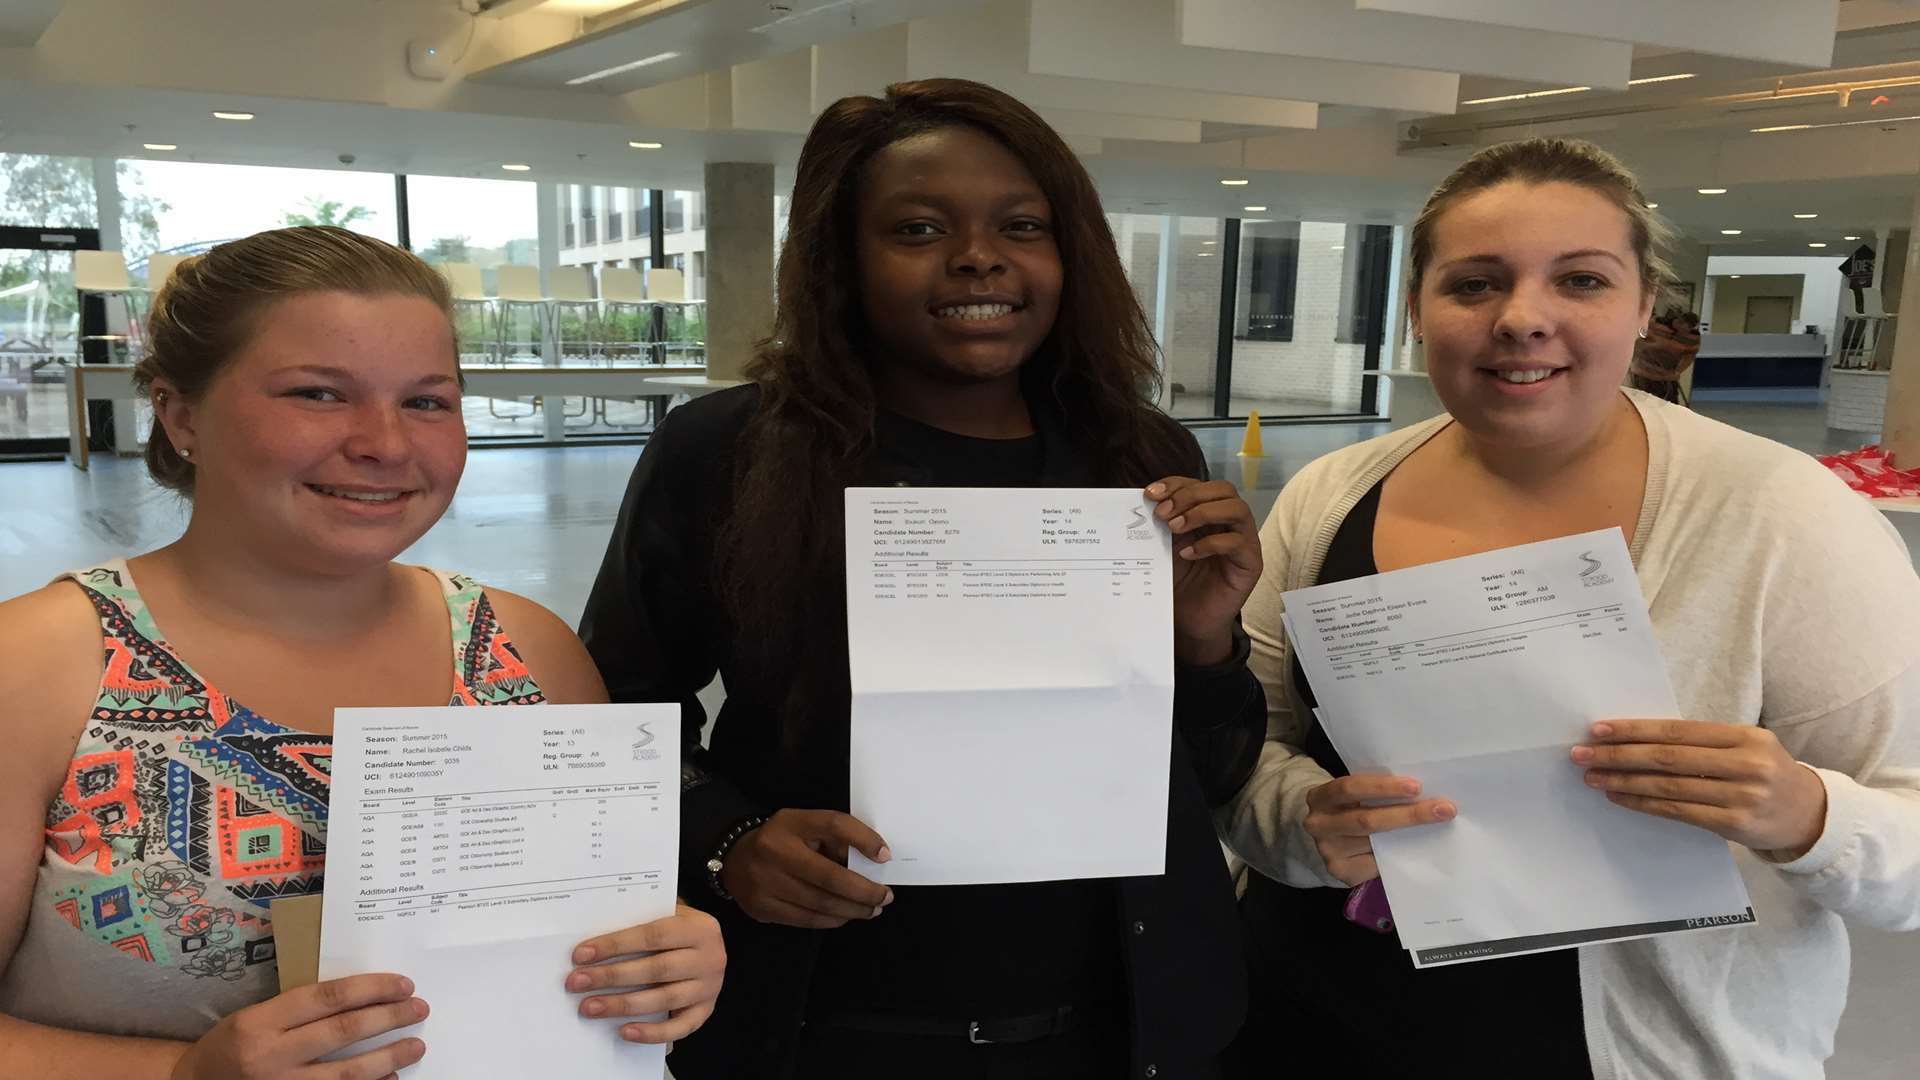 Rachel Childs, Ibukun Ojomo, and Jodie Evans find out their A Level results at Strood Academy